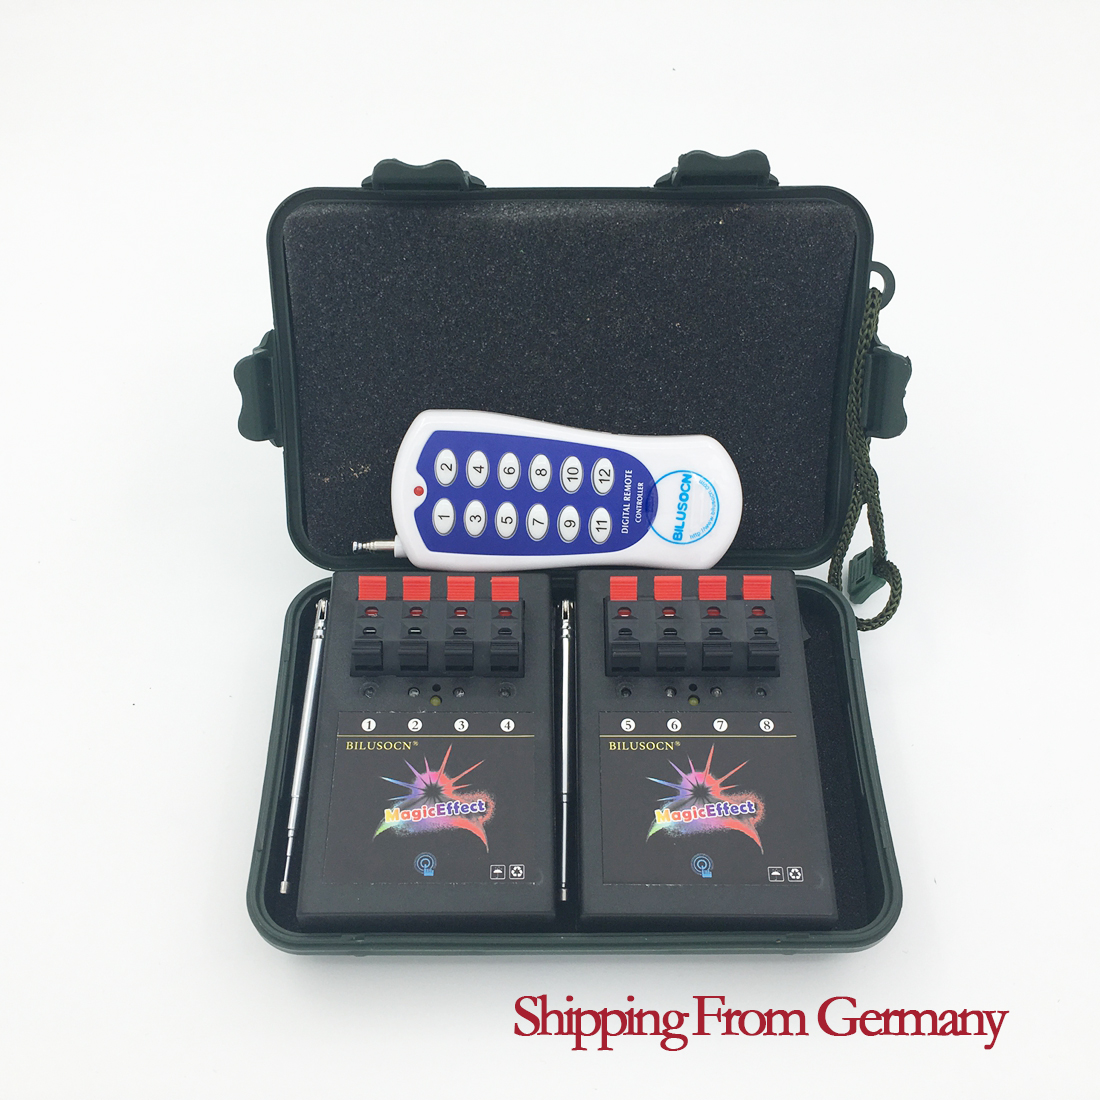 Shipping From Germany 8 Cue Wireless Fireworks Firing system equipment+Igniter Remote control